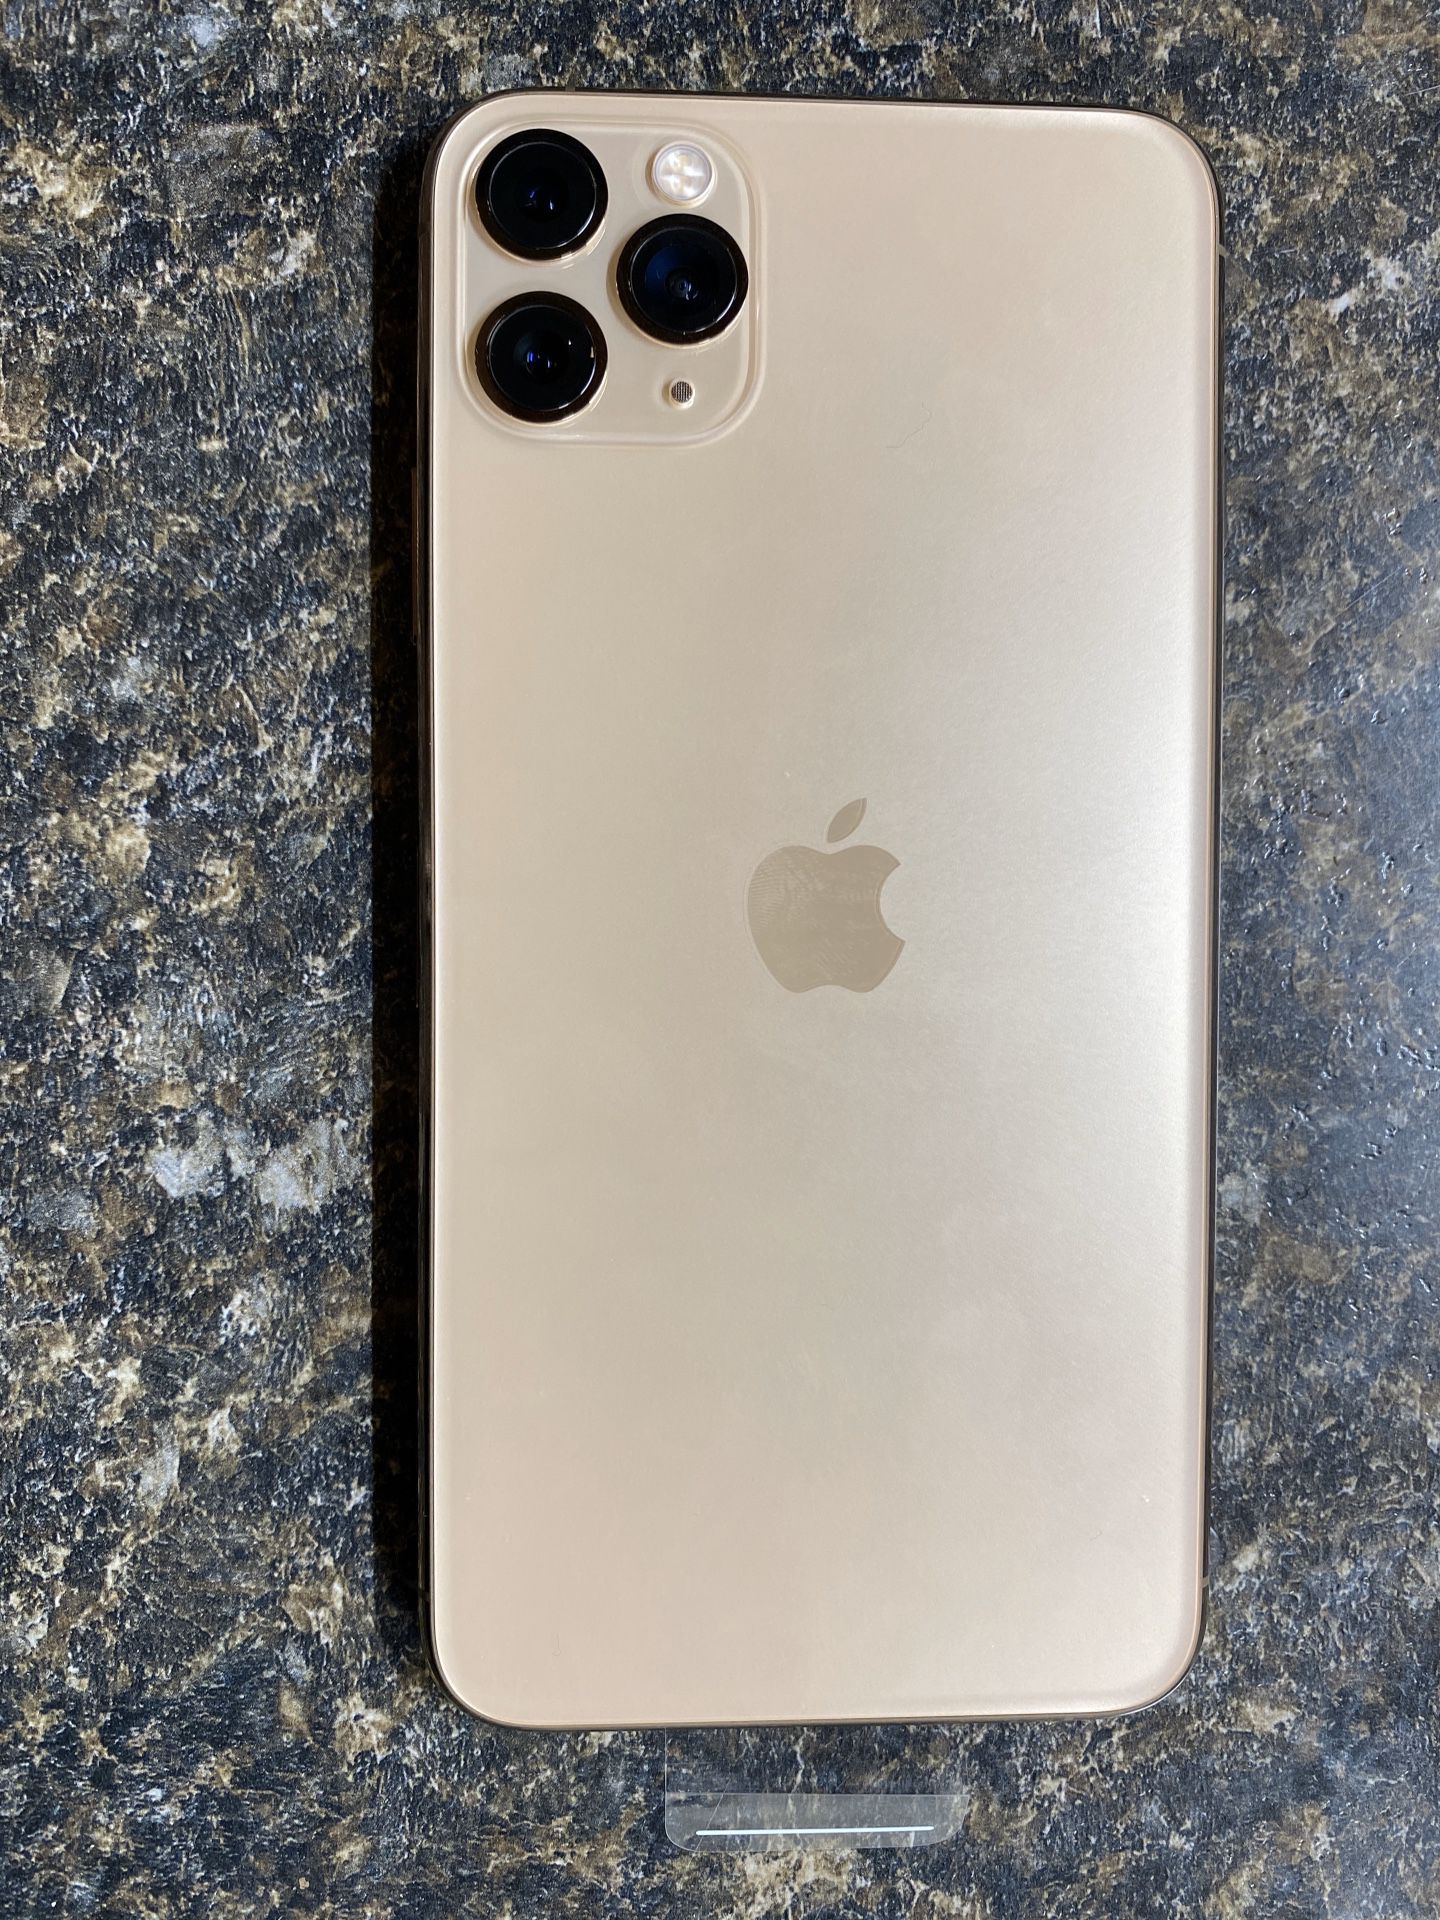 Brand New iPhone 11 Pro Max 256GB ATT/Cricket Only✅Price Firm✅